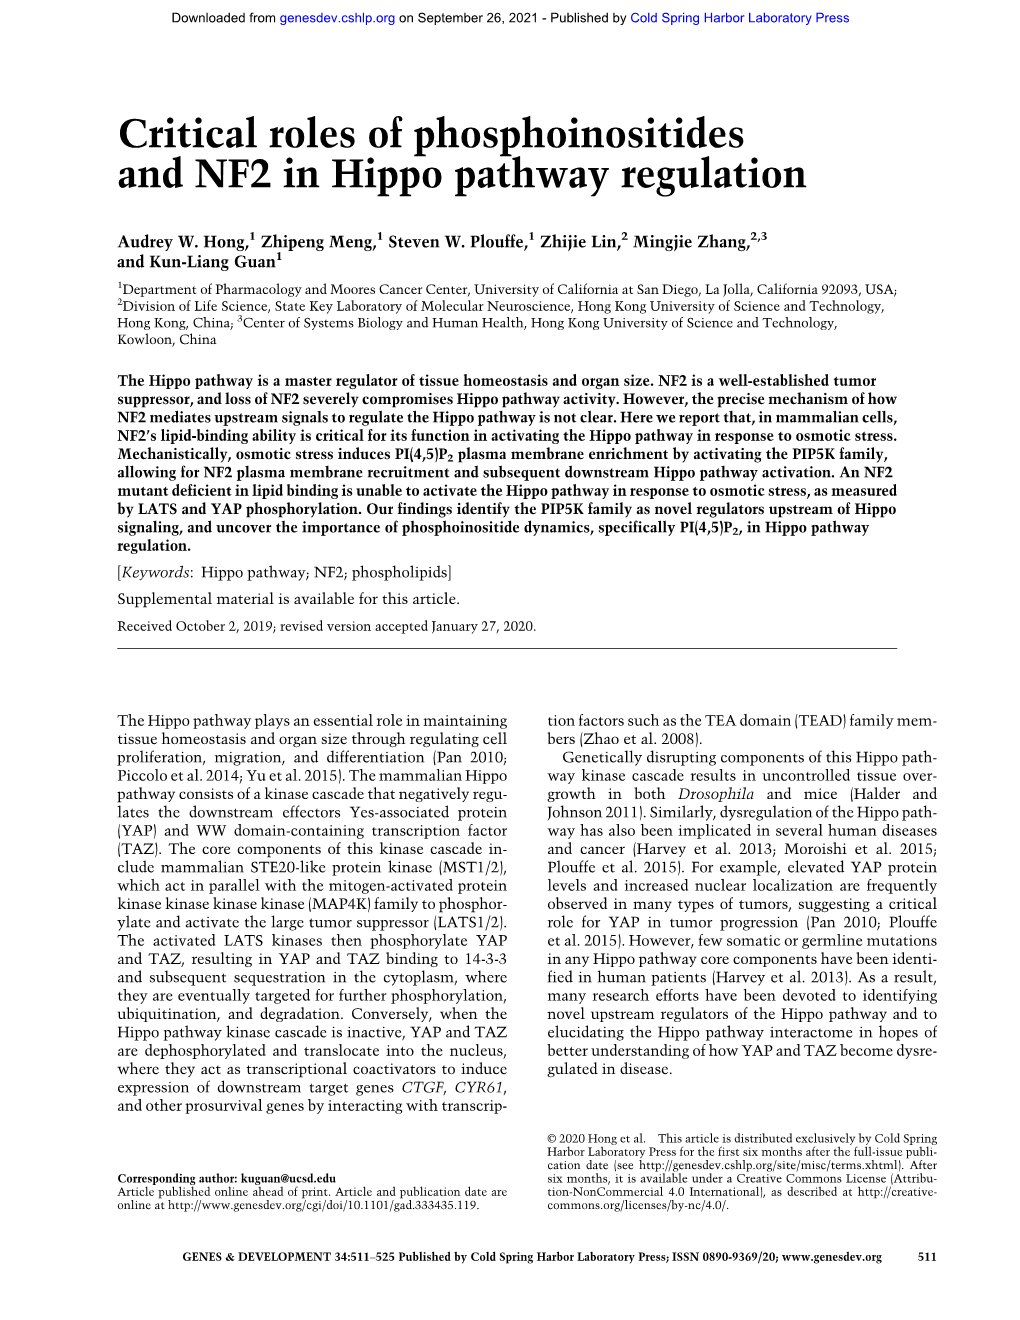 Critical Roles of Phosphoinositides and NF2 in Hippo Pathway Regulation